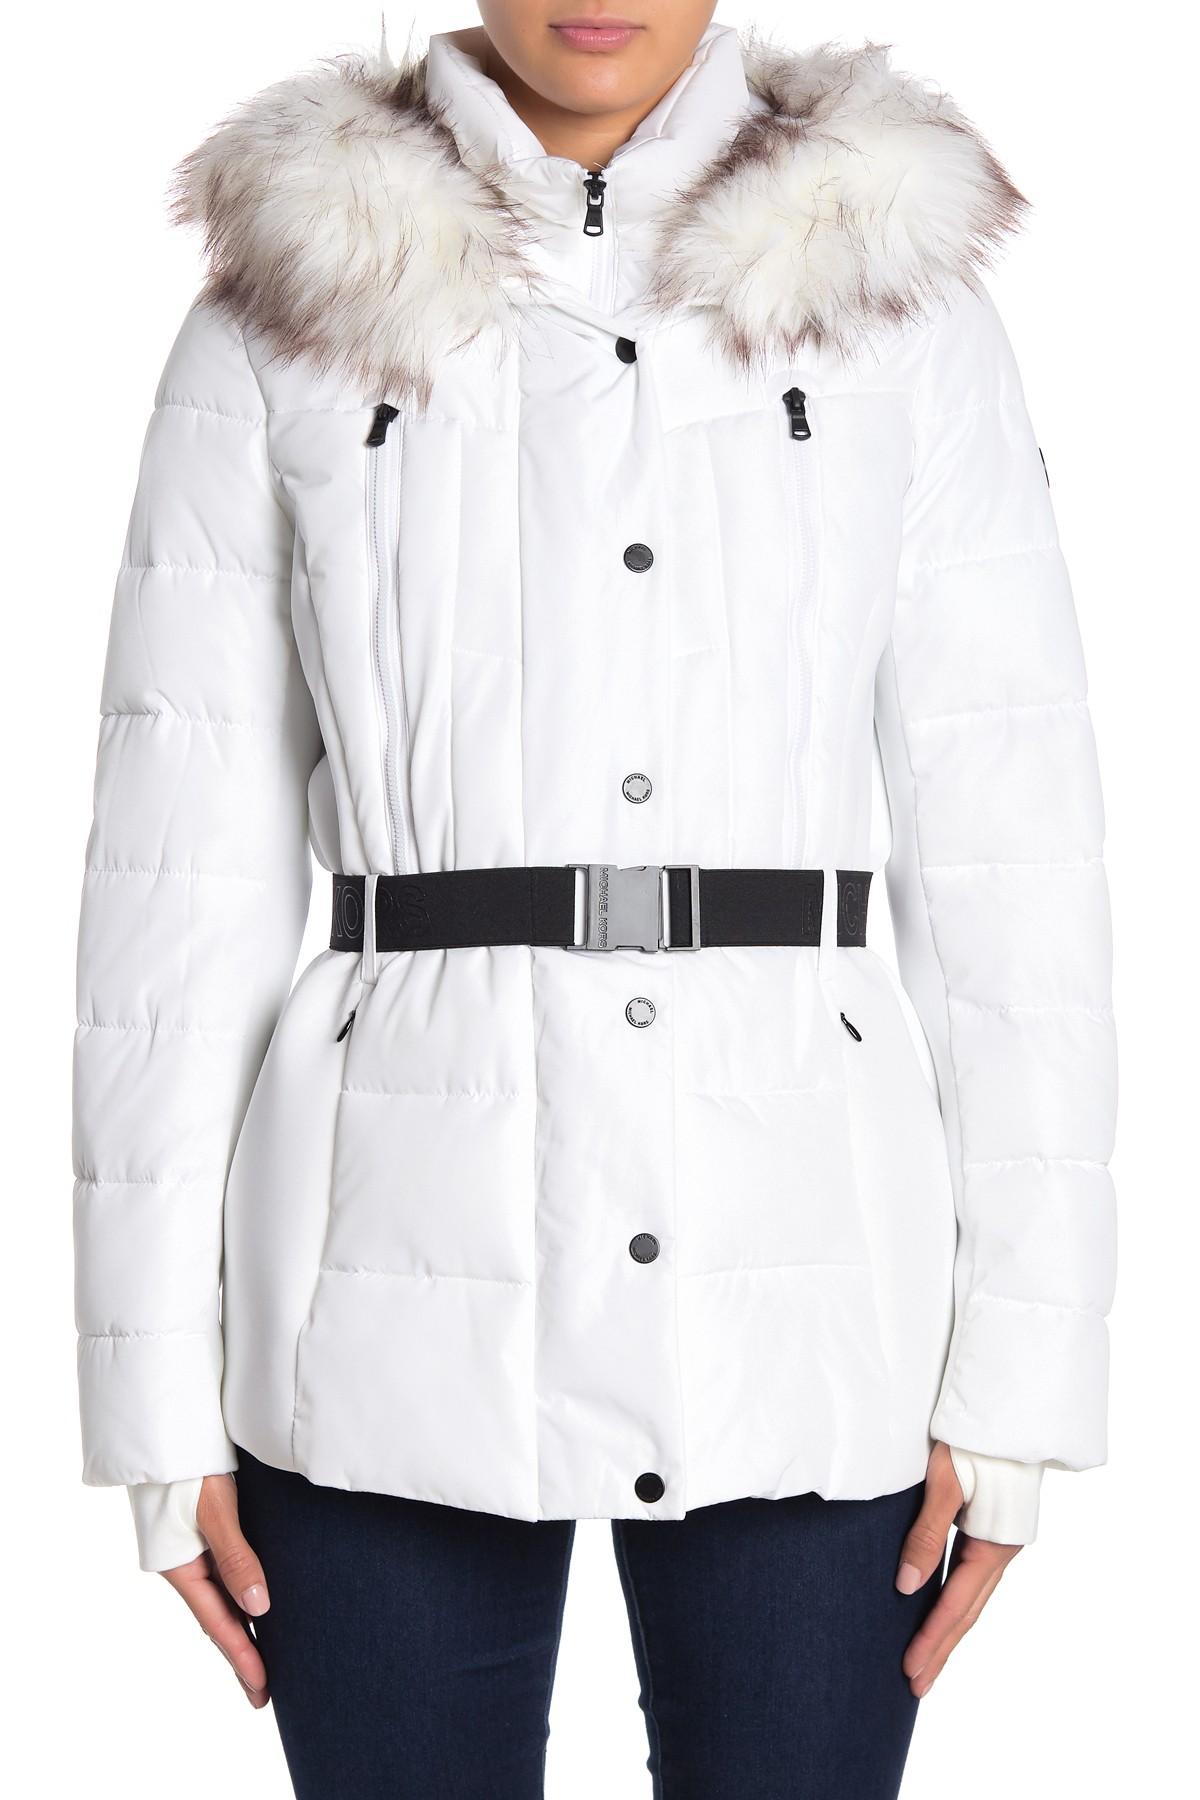 michael kors faux fur hooded belted down puffer coat